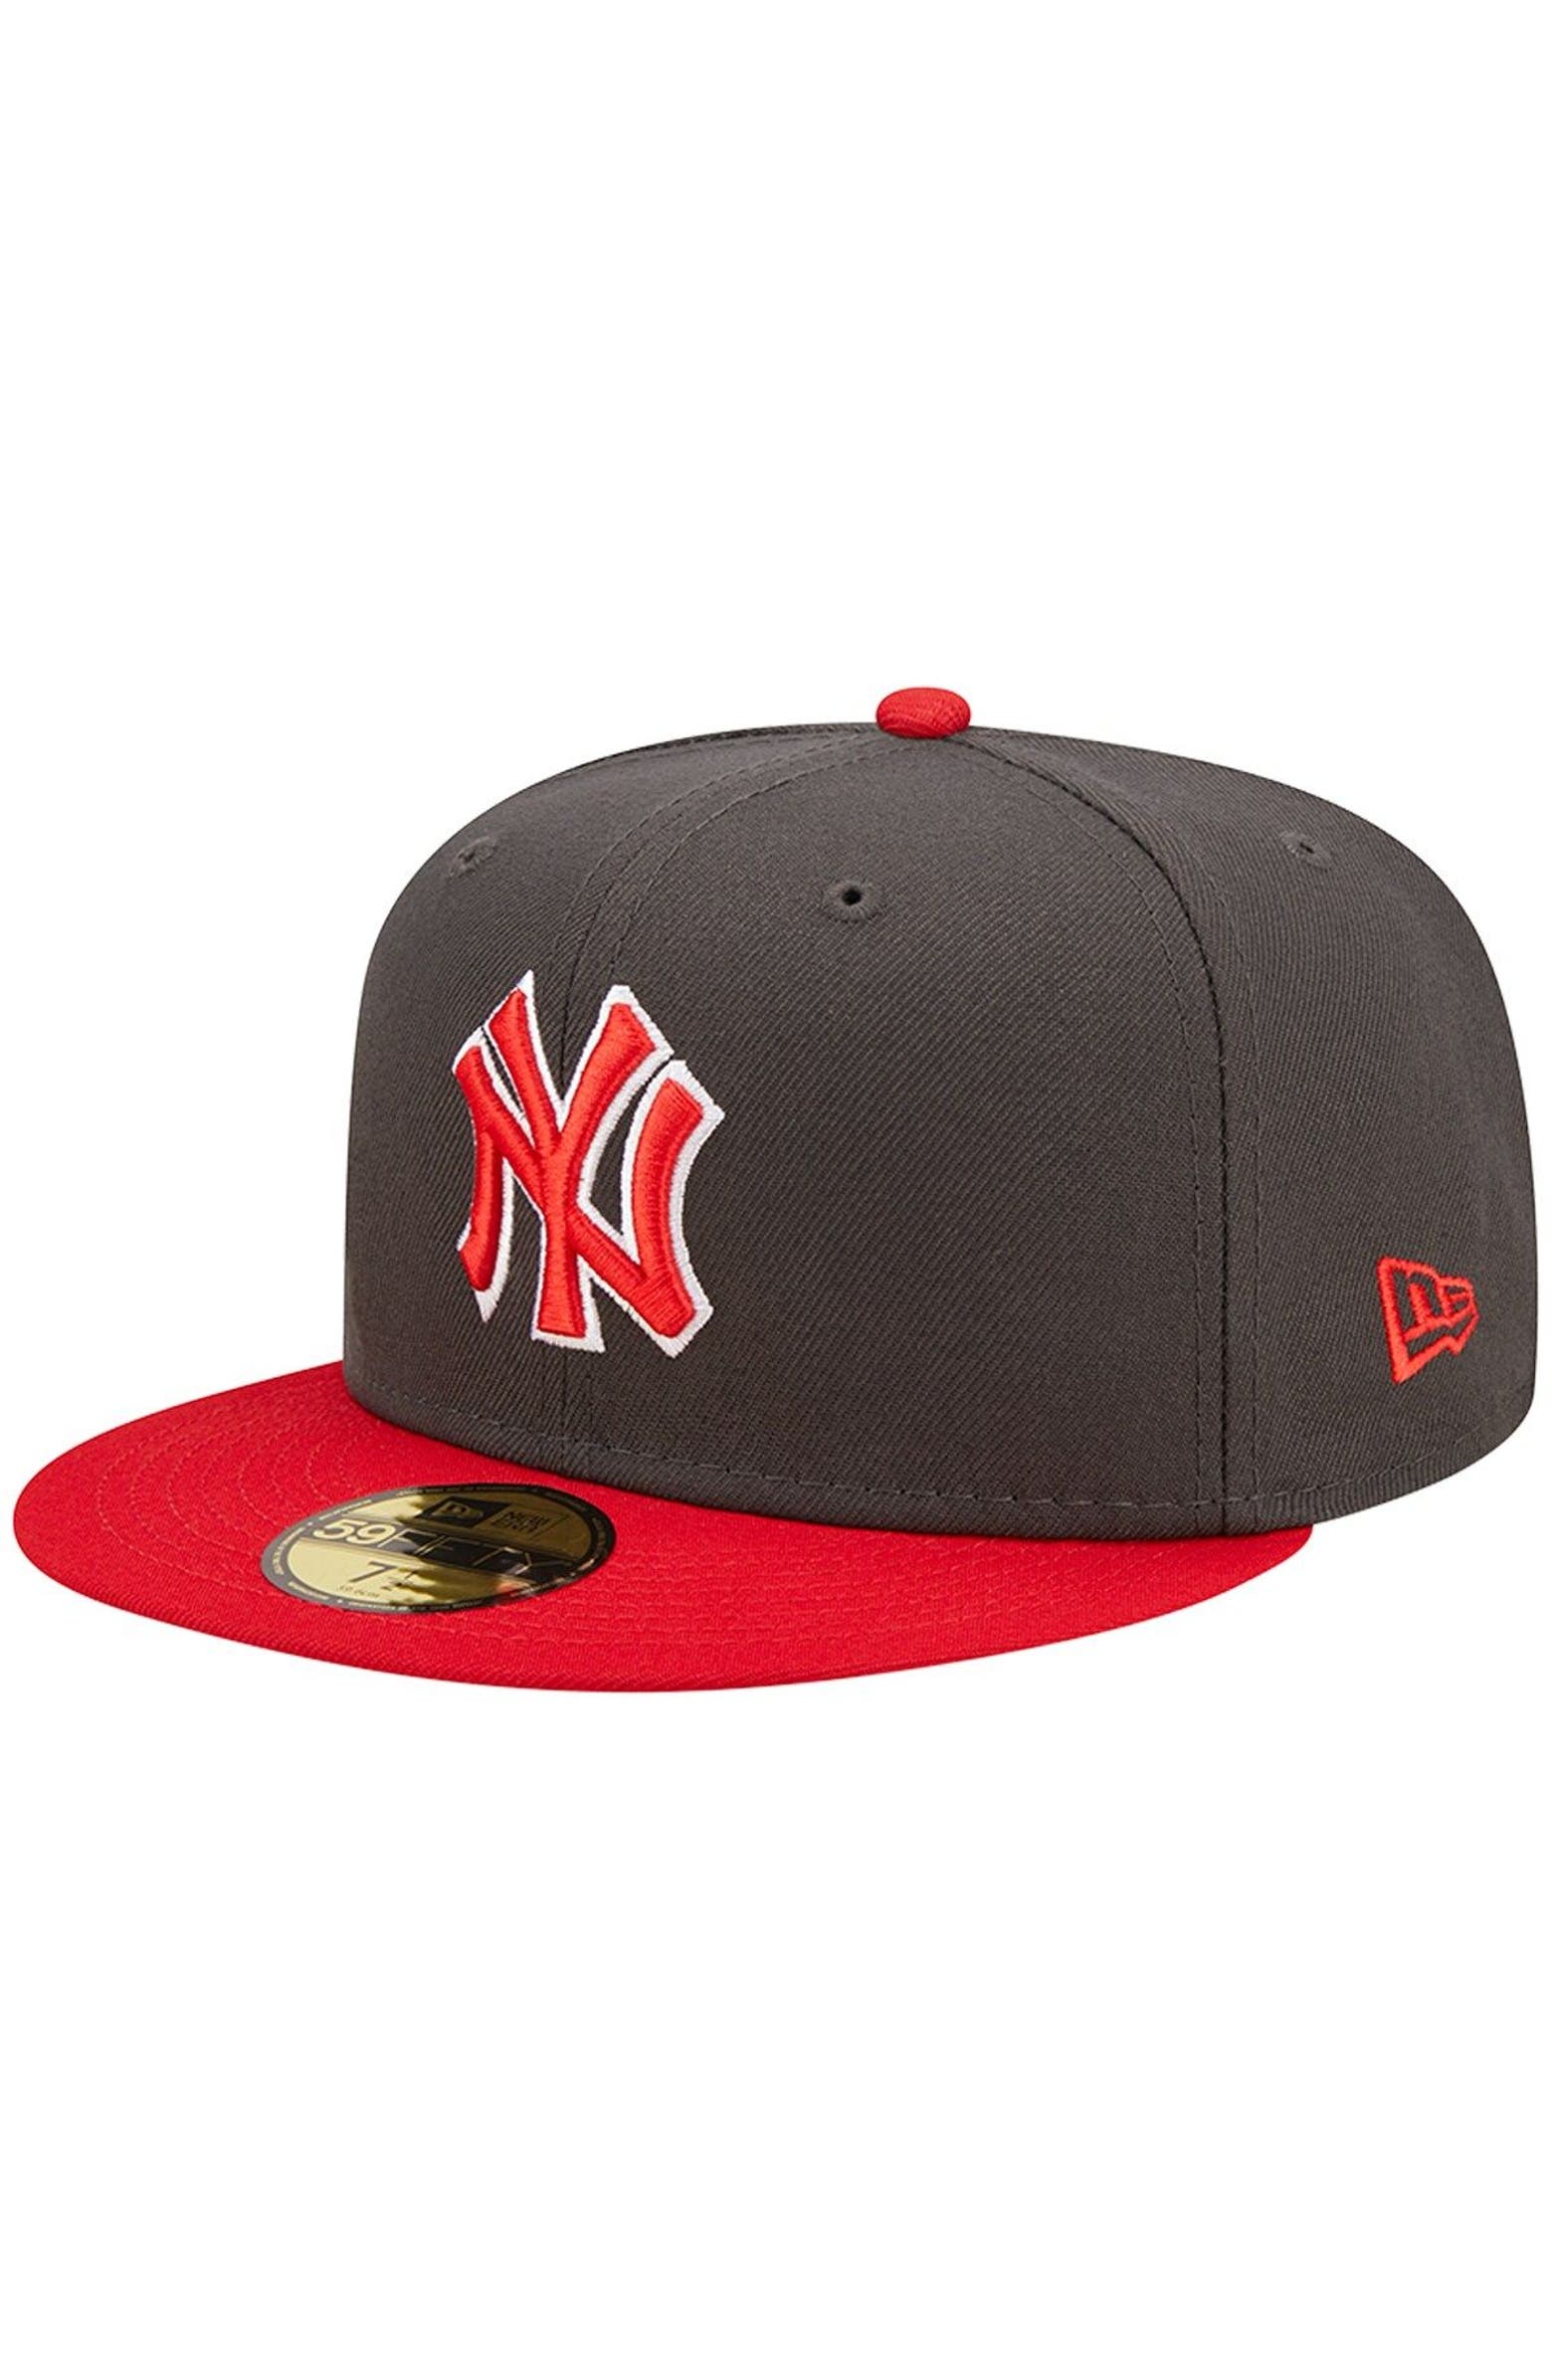 New Era Men's New Era Charcoal/Red New York Yankees Two-Tone Color Pack ...